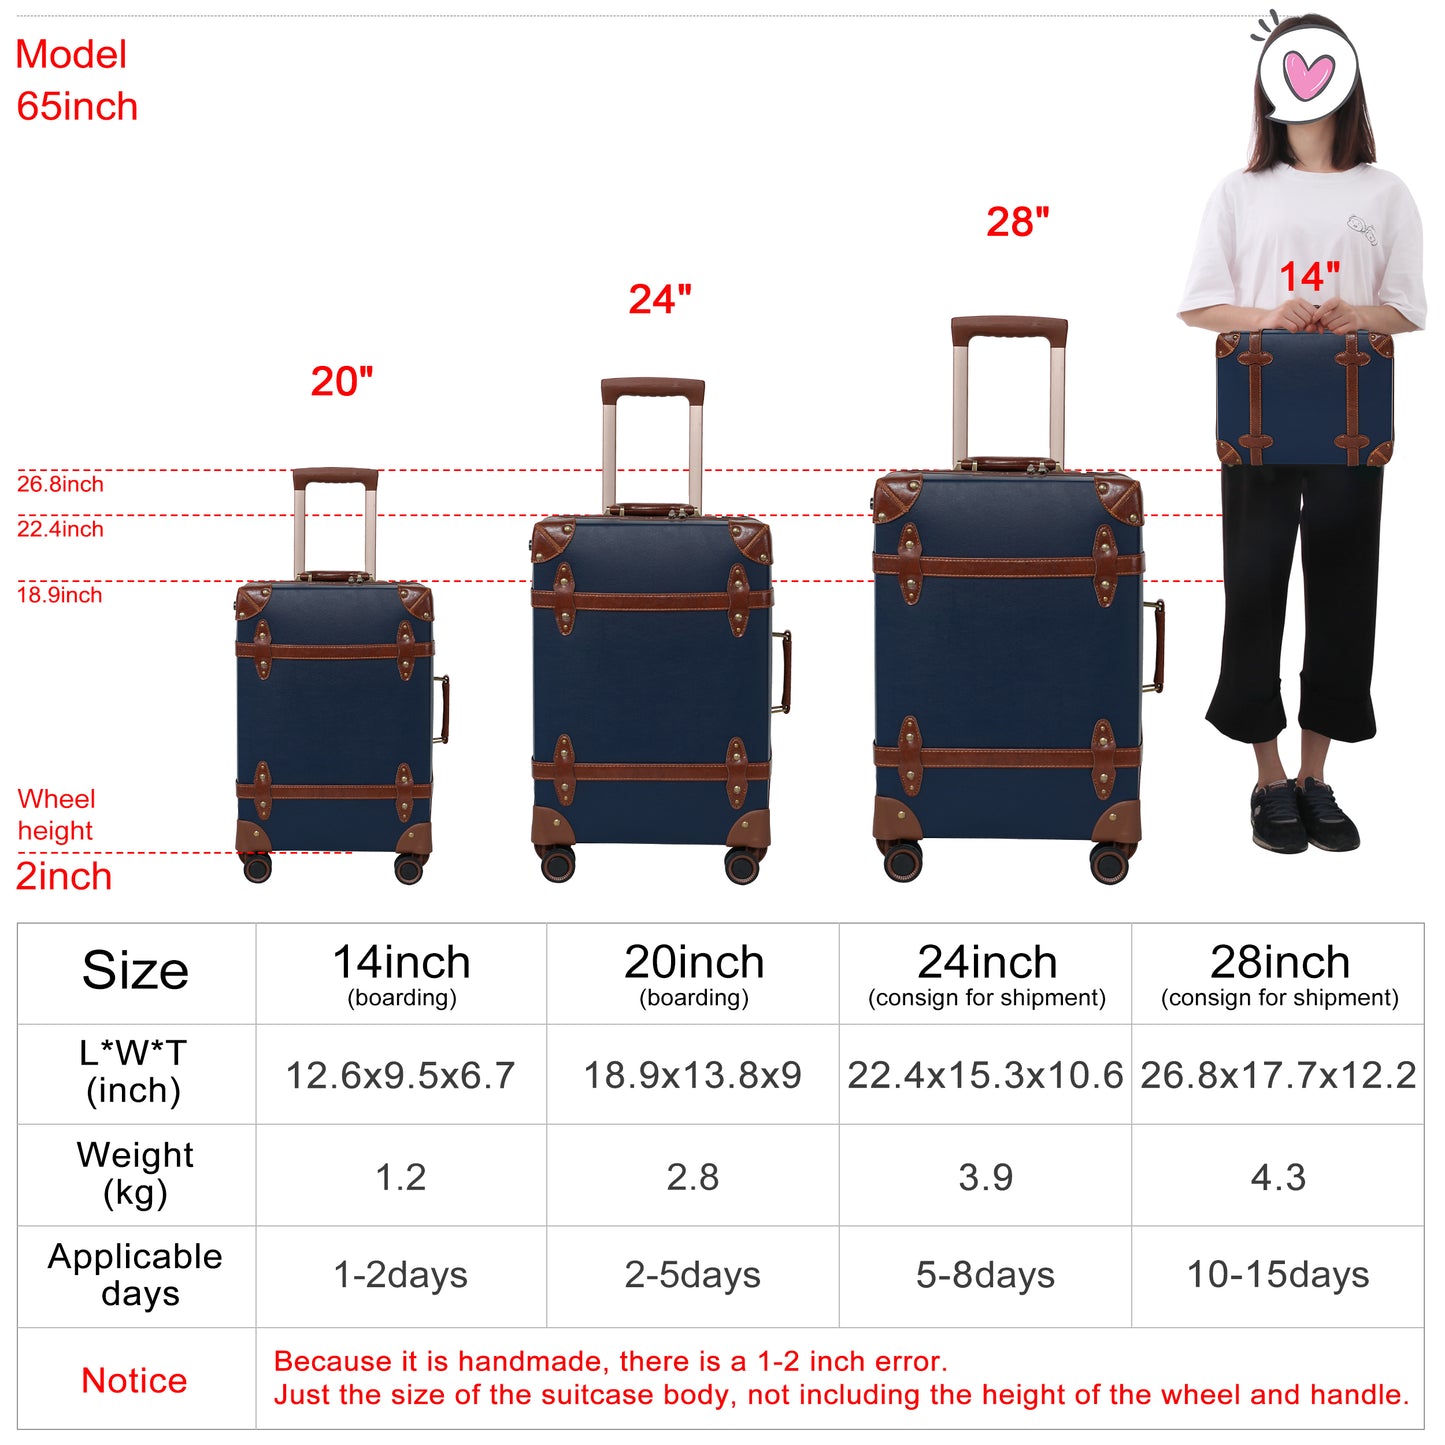 NZBZ 3 Pieces Vintage Luggage Set Carry On Cute Suitcase with Rolling Spinner Wheels and Tsa Lock Retro Trunk luggage